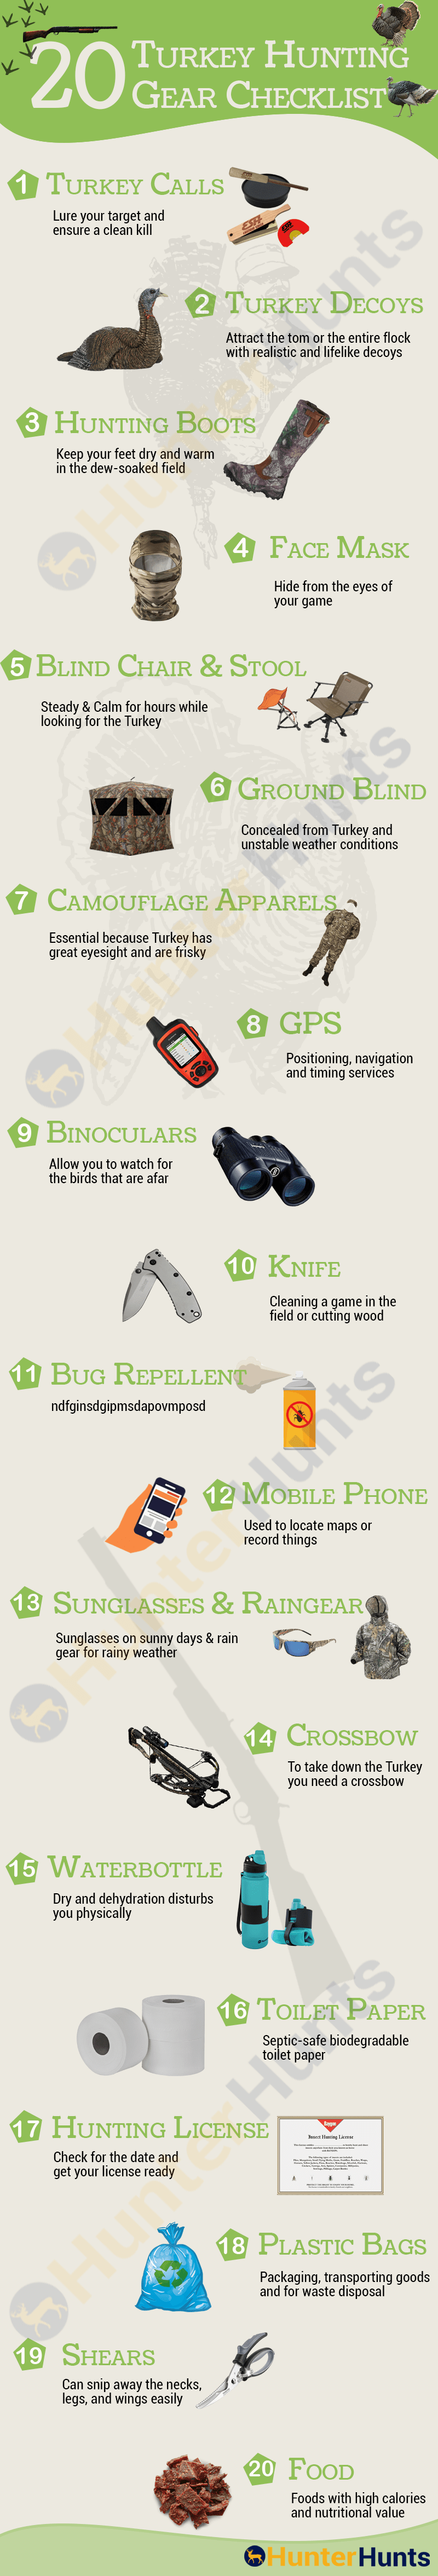 infographic of 20 Spring Turkey Hunting Gear Checklist 